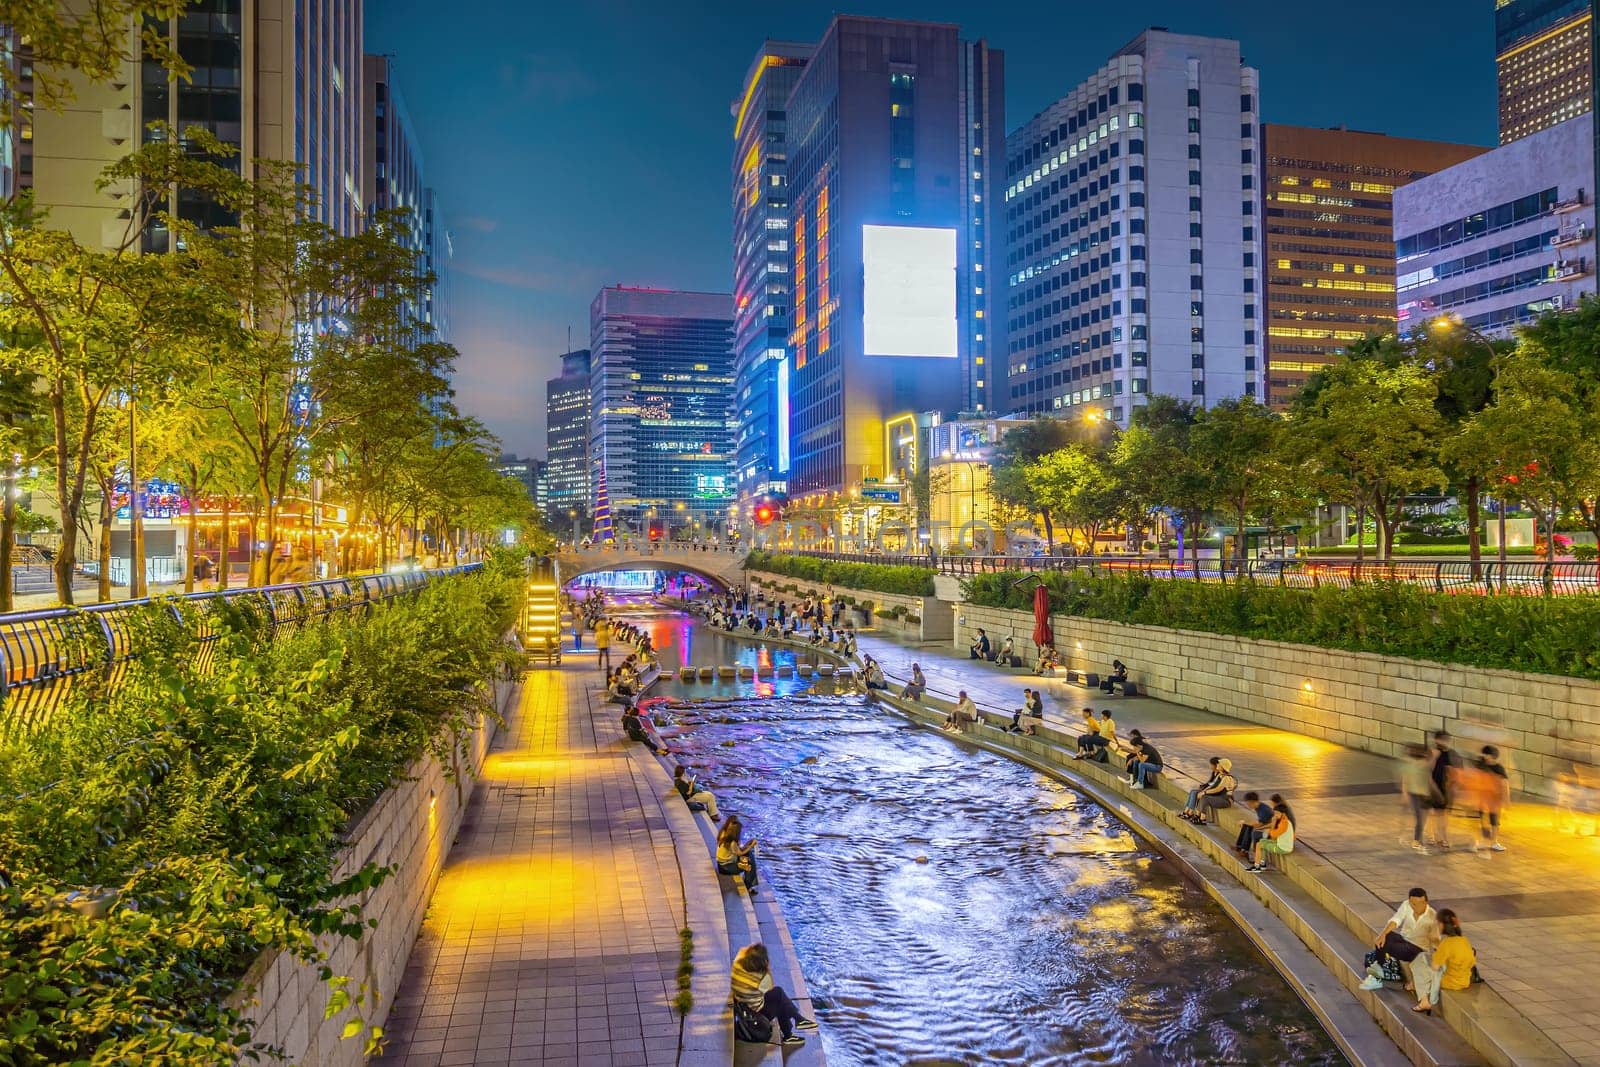 Cheonggyecheon, a modern public recreation space in downtown Seoul, South Korea by f11photo